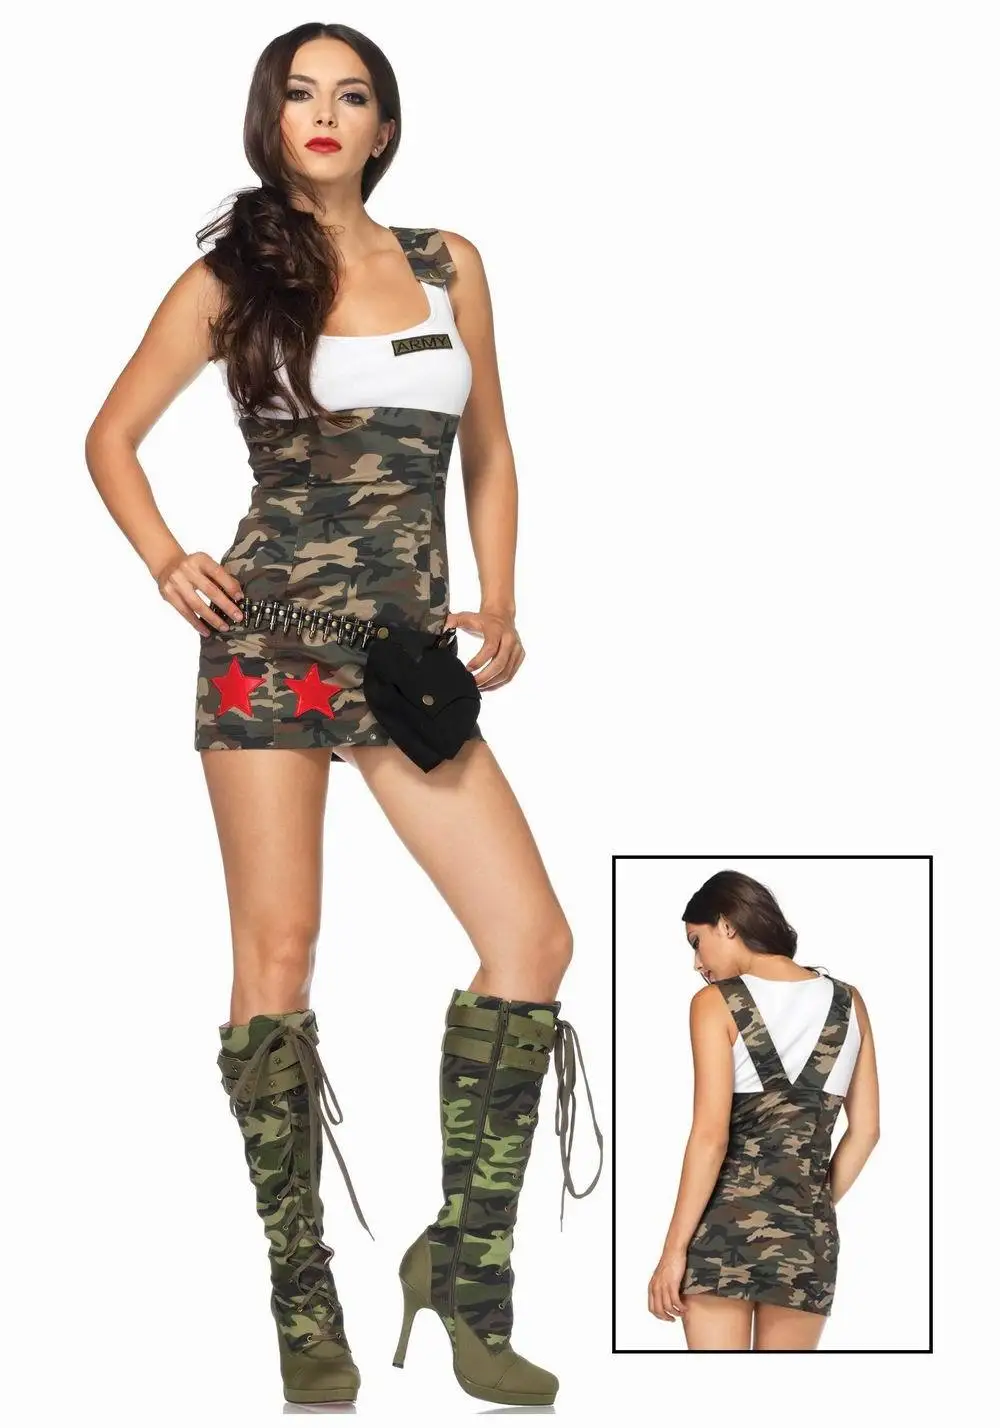 Ladies Army Fancy Dress Costume With Free Shipping 3s1539 Women Sexy 